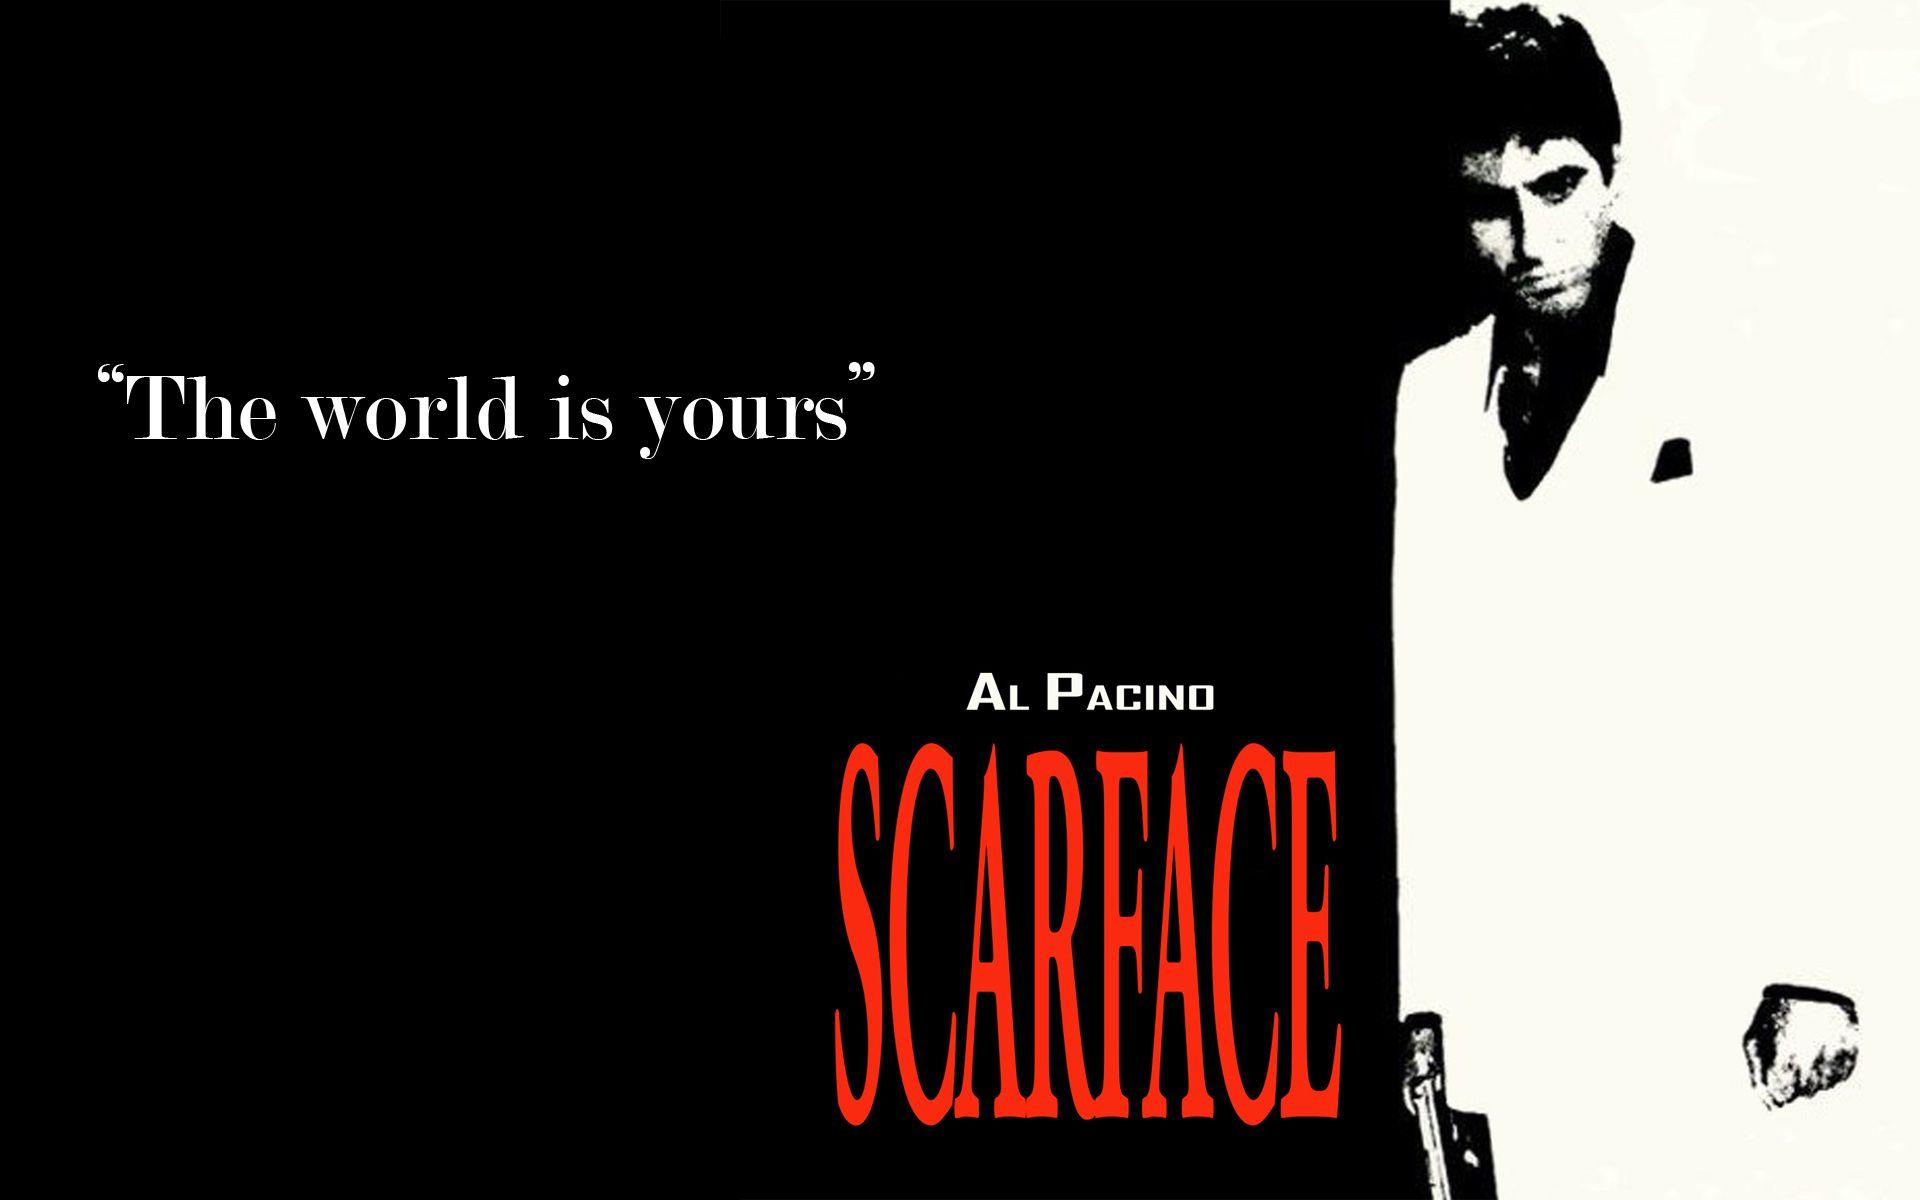 Download Scarface Wallpaper 1920x1200